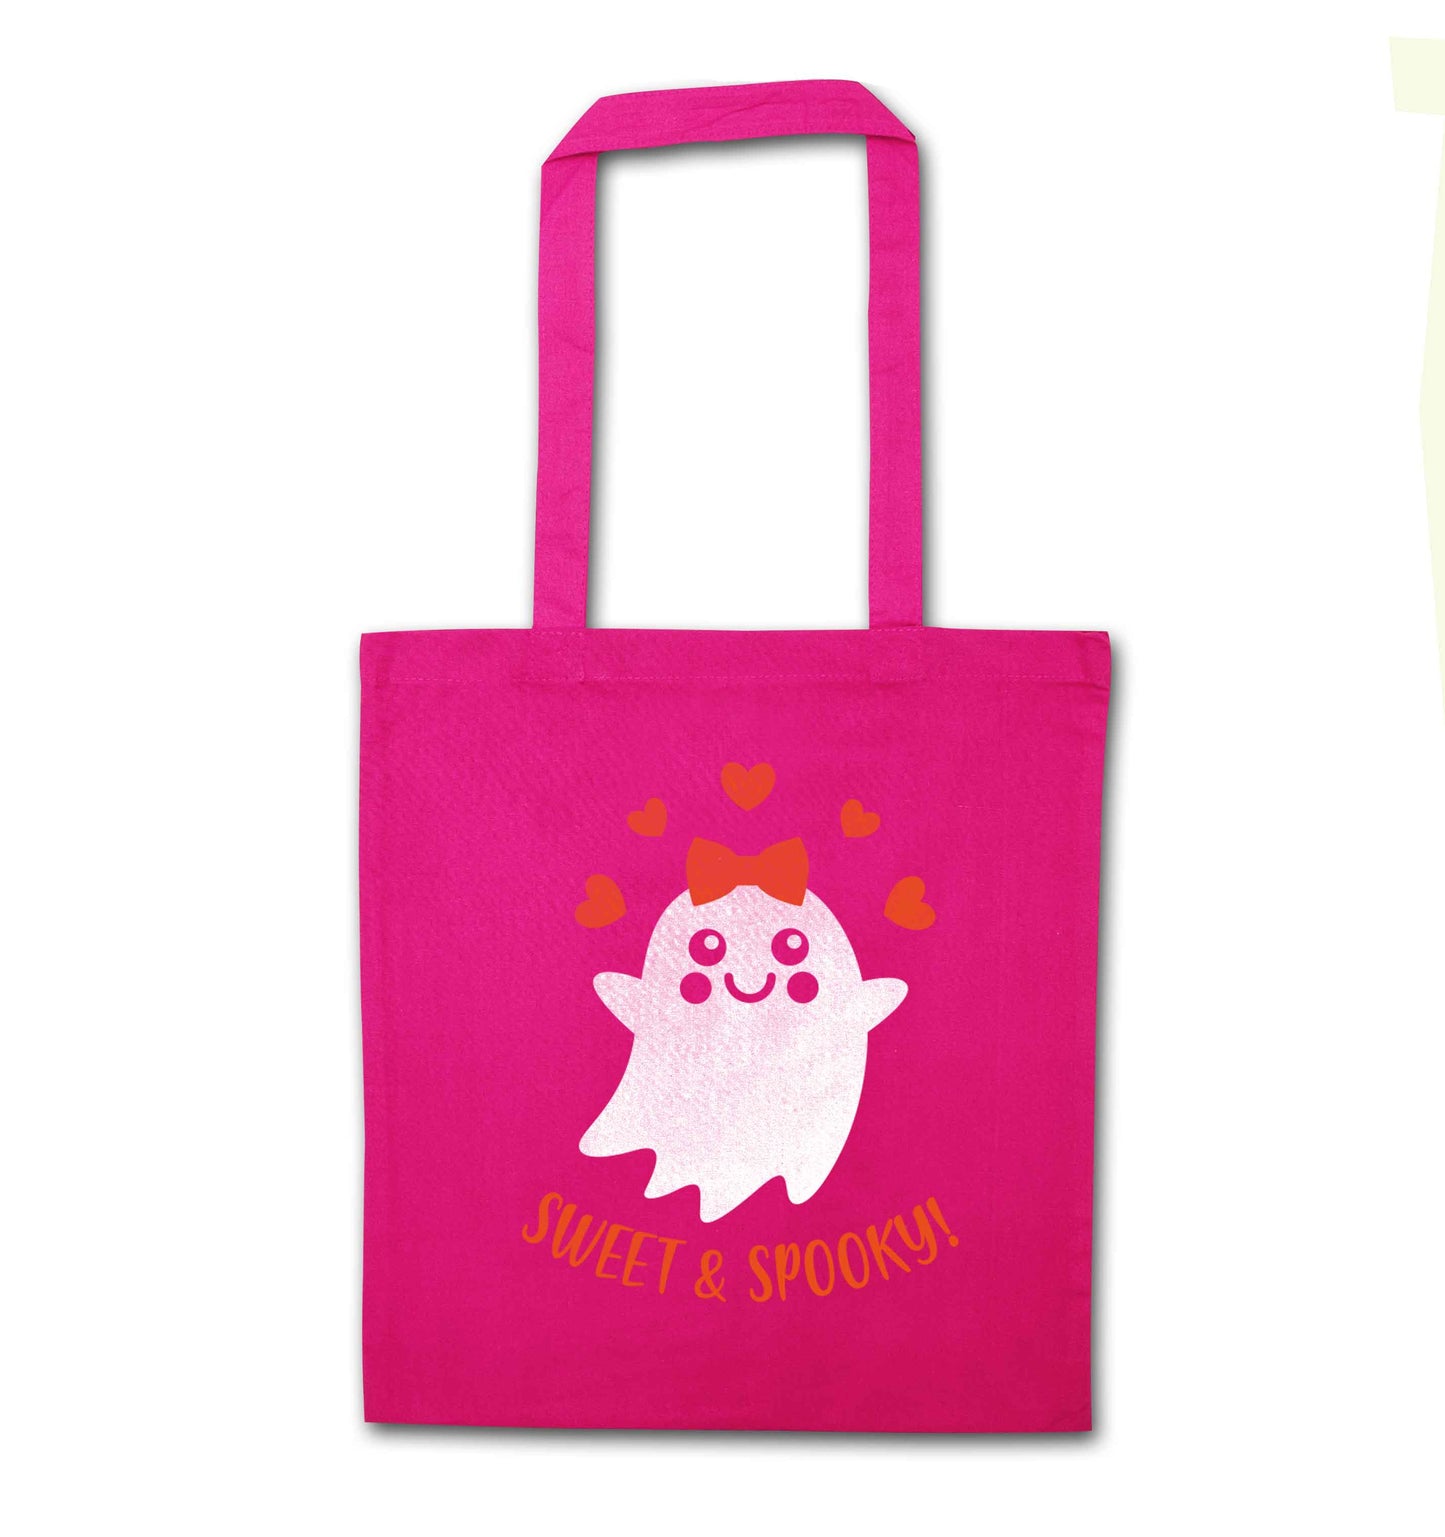 Sweet and spooky pink tote bag